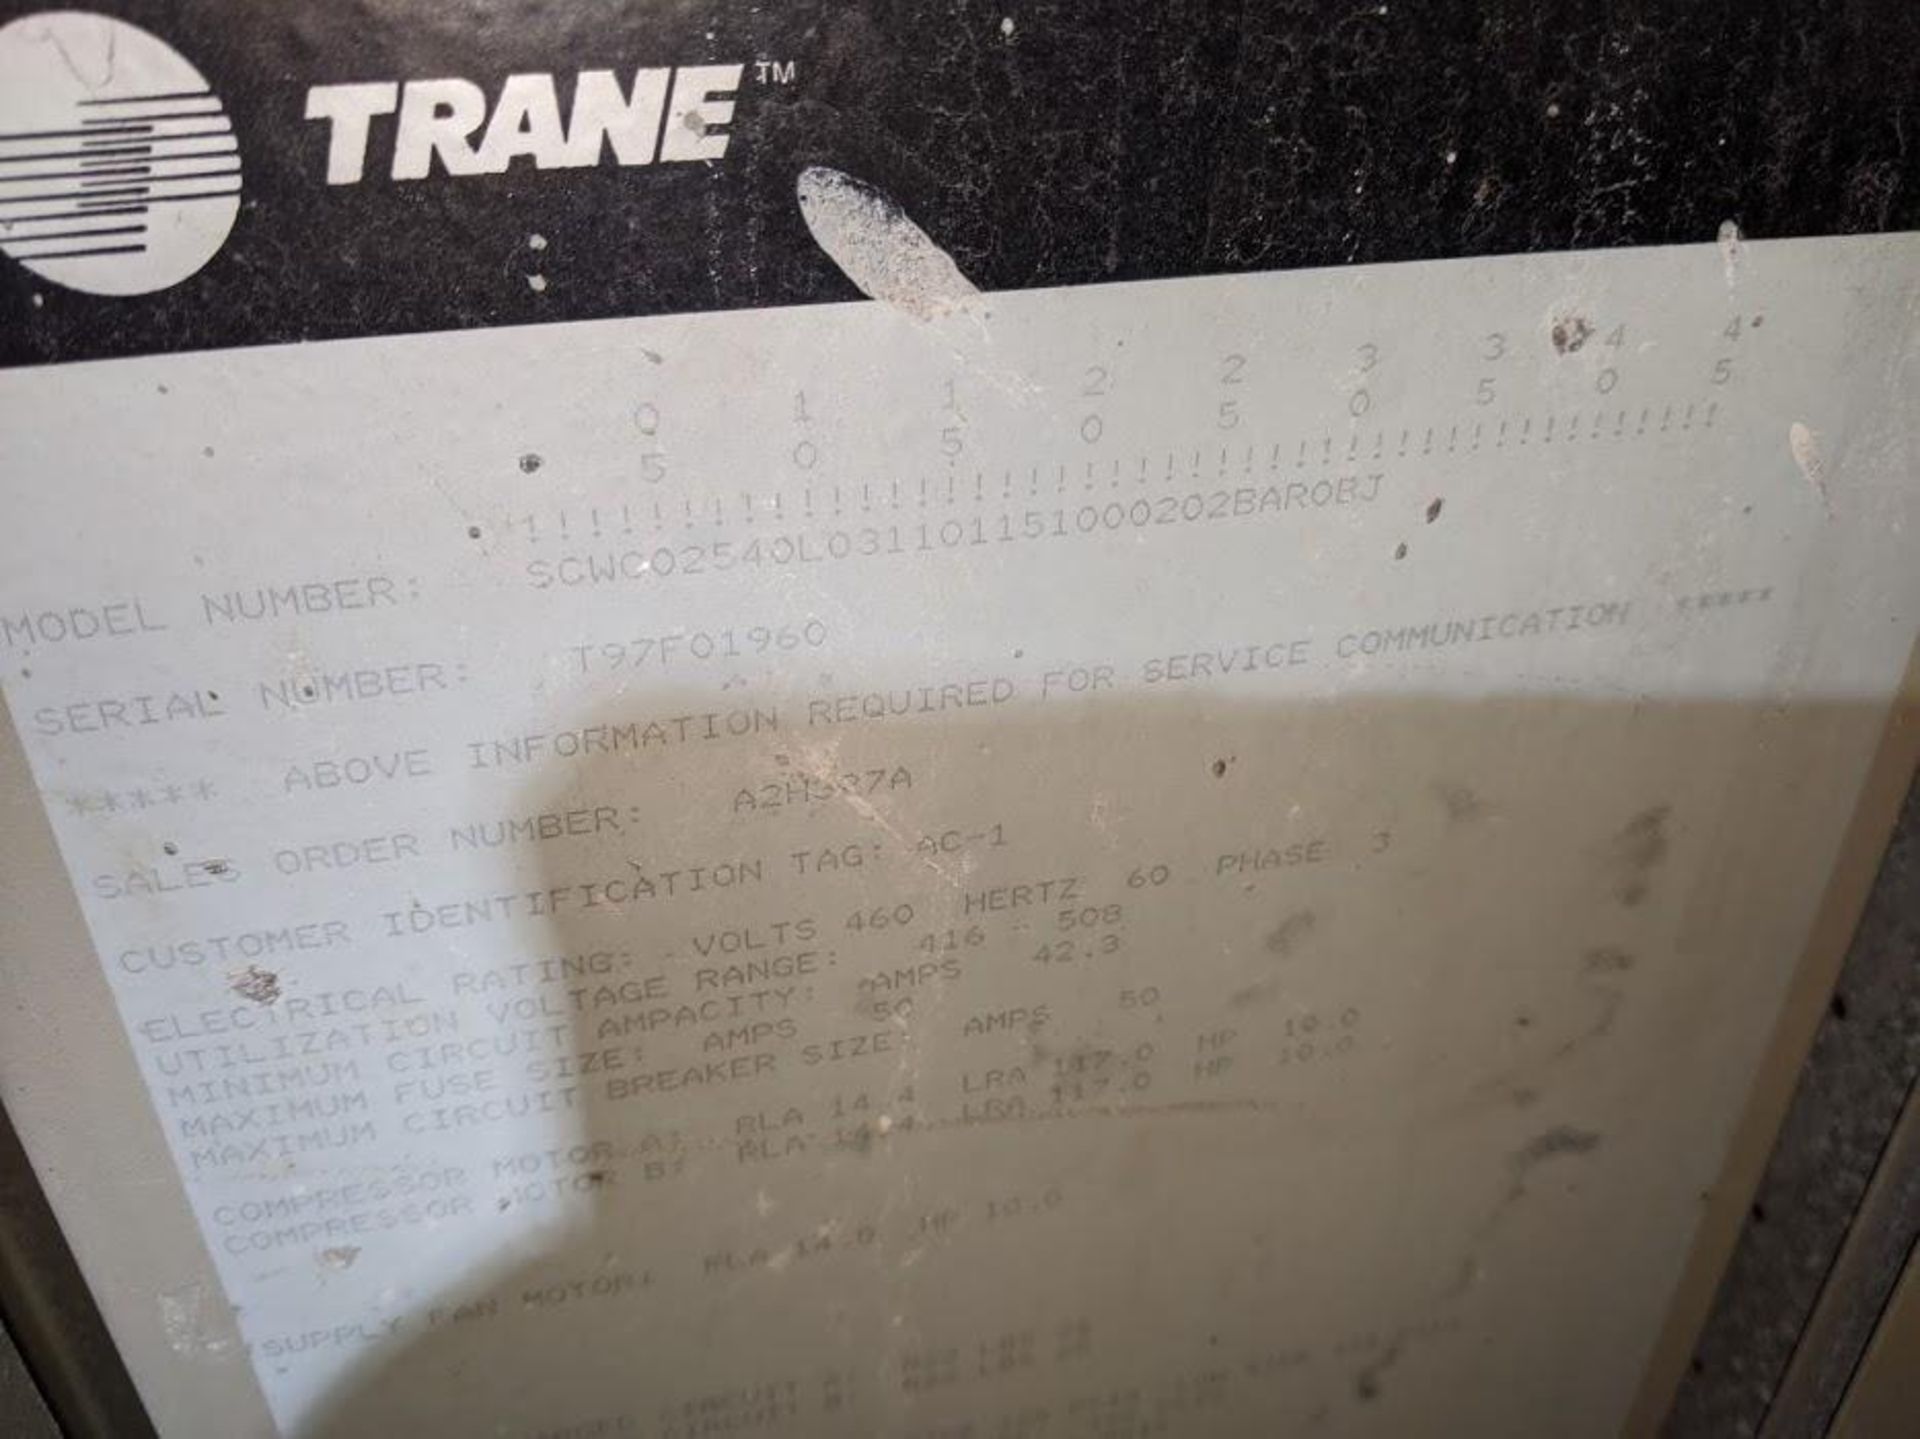 TRANE SELF CONTAINED COMMERCIAL 10 TON AC UNIT SCWC02540L031101151000202BAR0BJ - Image 2 of 3